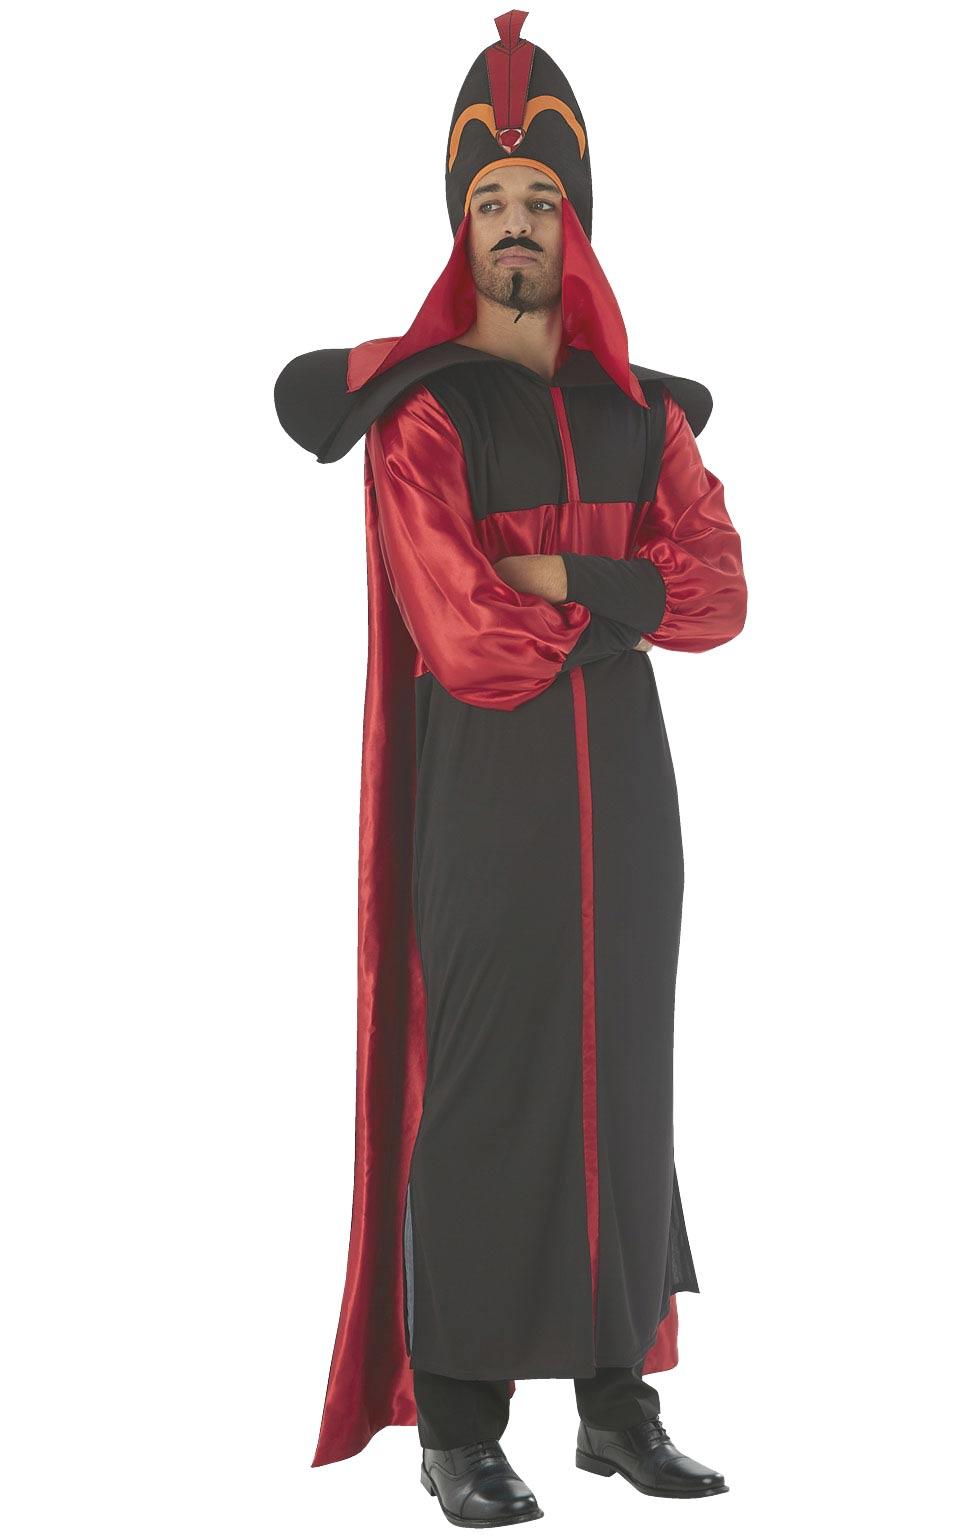 Aladdin Jafar Costume for Adults by Rubies 821238 available here at Karnival Costumes onliine party shop